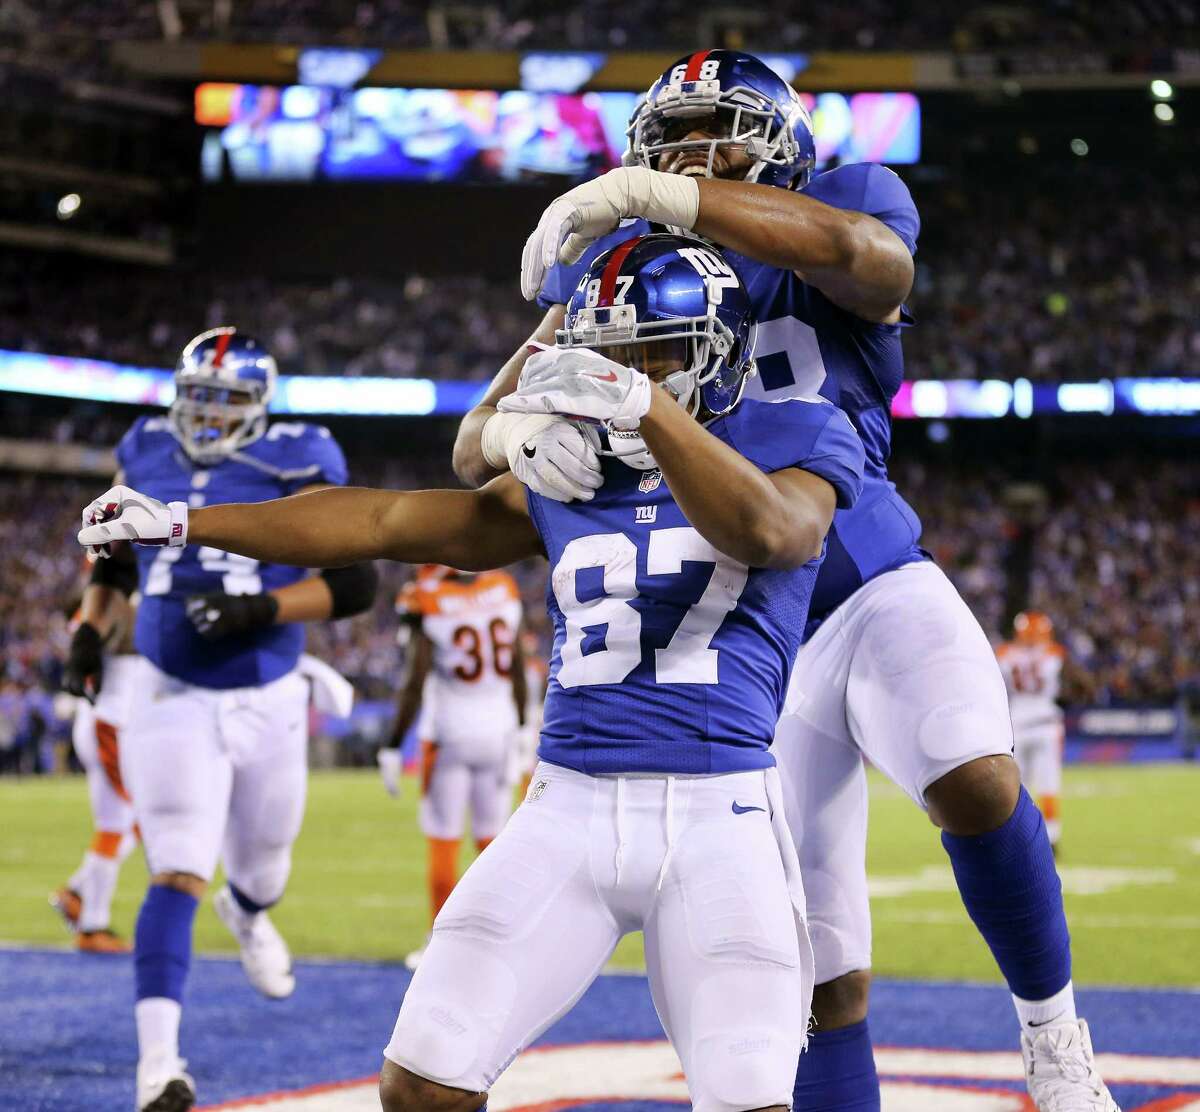 New York Giants wide receiver Sterling Shepard (87) celebrates with offensive tackle Bobby Hart (68) after scoring a touchdown against the Cincinnati Bengals during the fourth quarter in East Rutherford, N.J. Monday night.